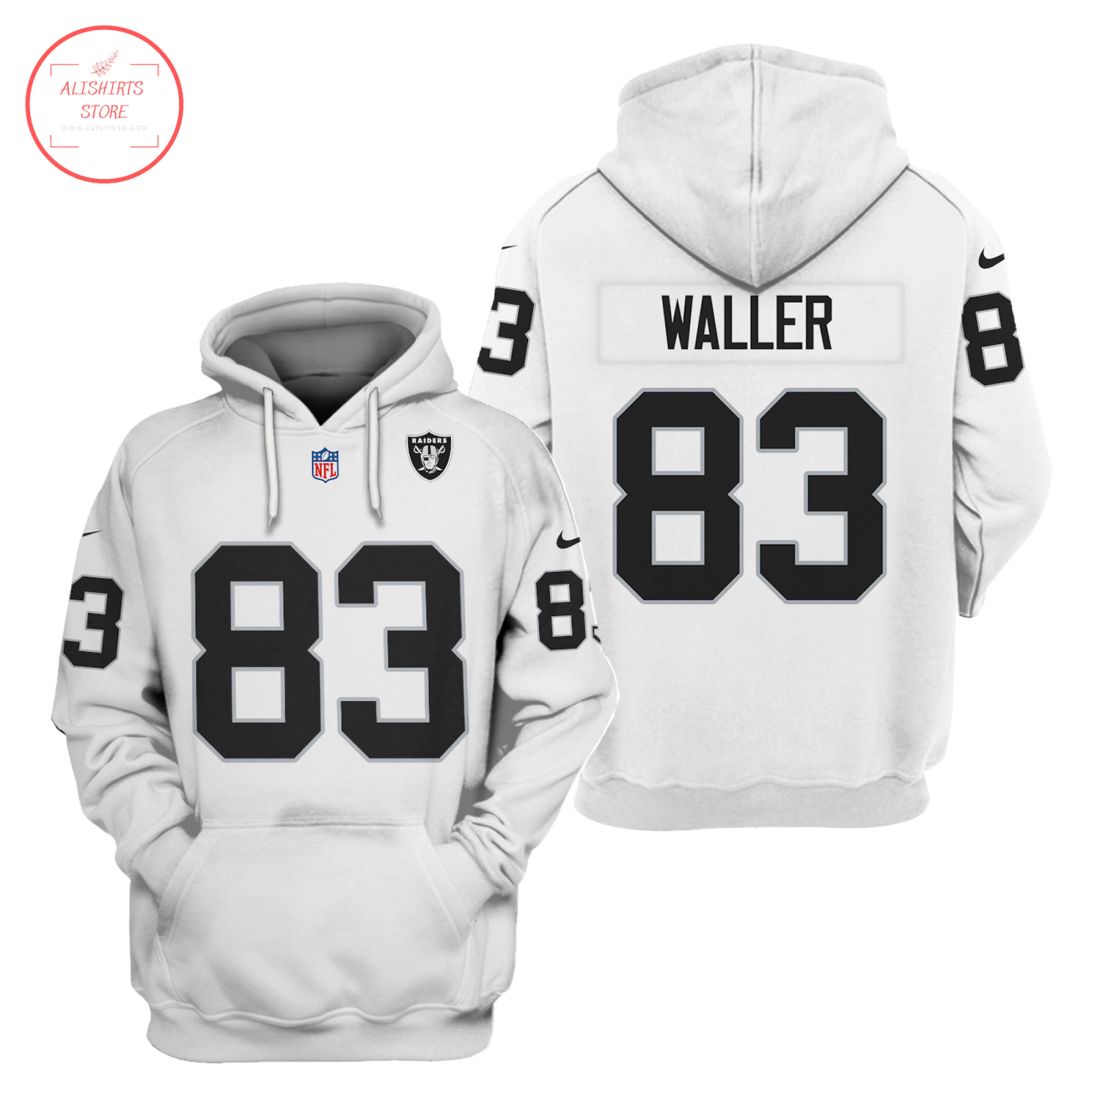 NFL Oakland Raiders Waller White Shirt and Hoodie